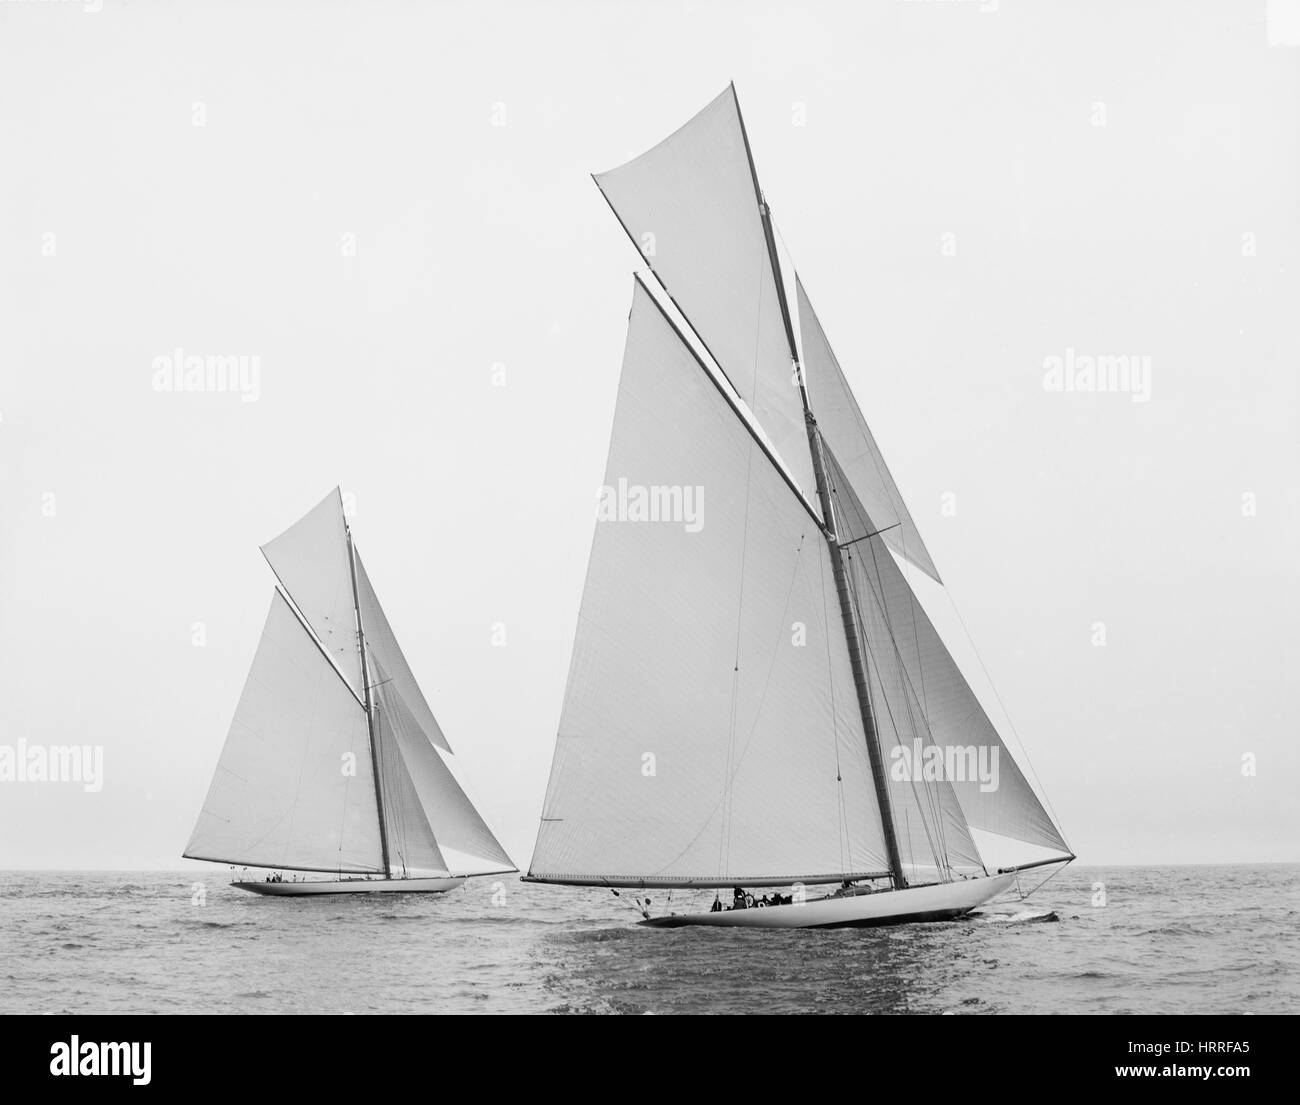 Reliance and Shamrock III, Start of America's Cup Race, Detroit Publishing Company, New York City Harbor, New York, USA, August 1903 Stock Photo